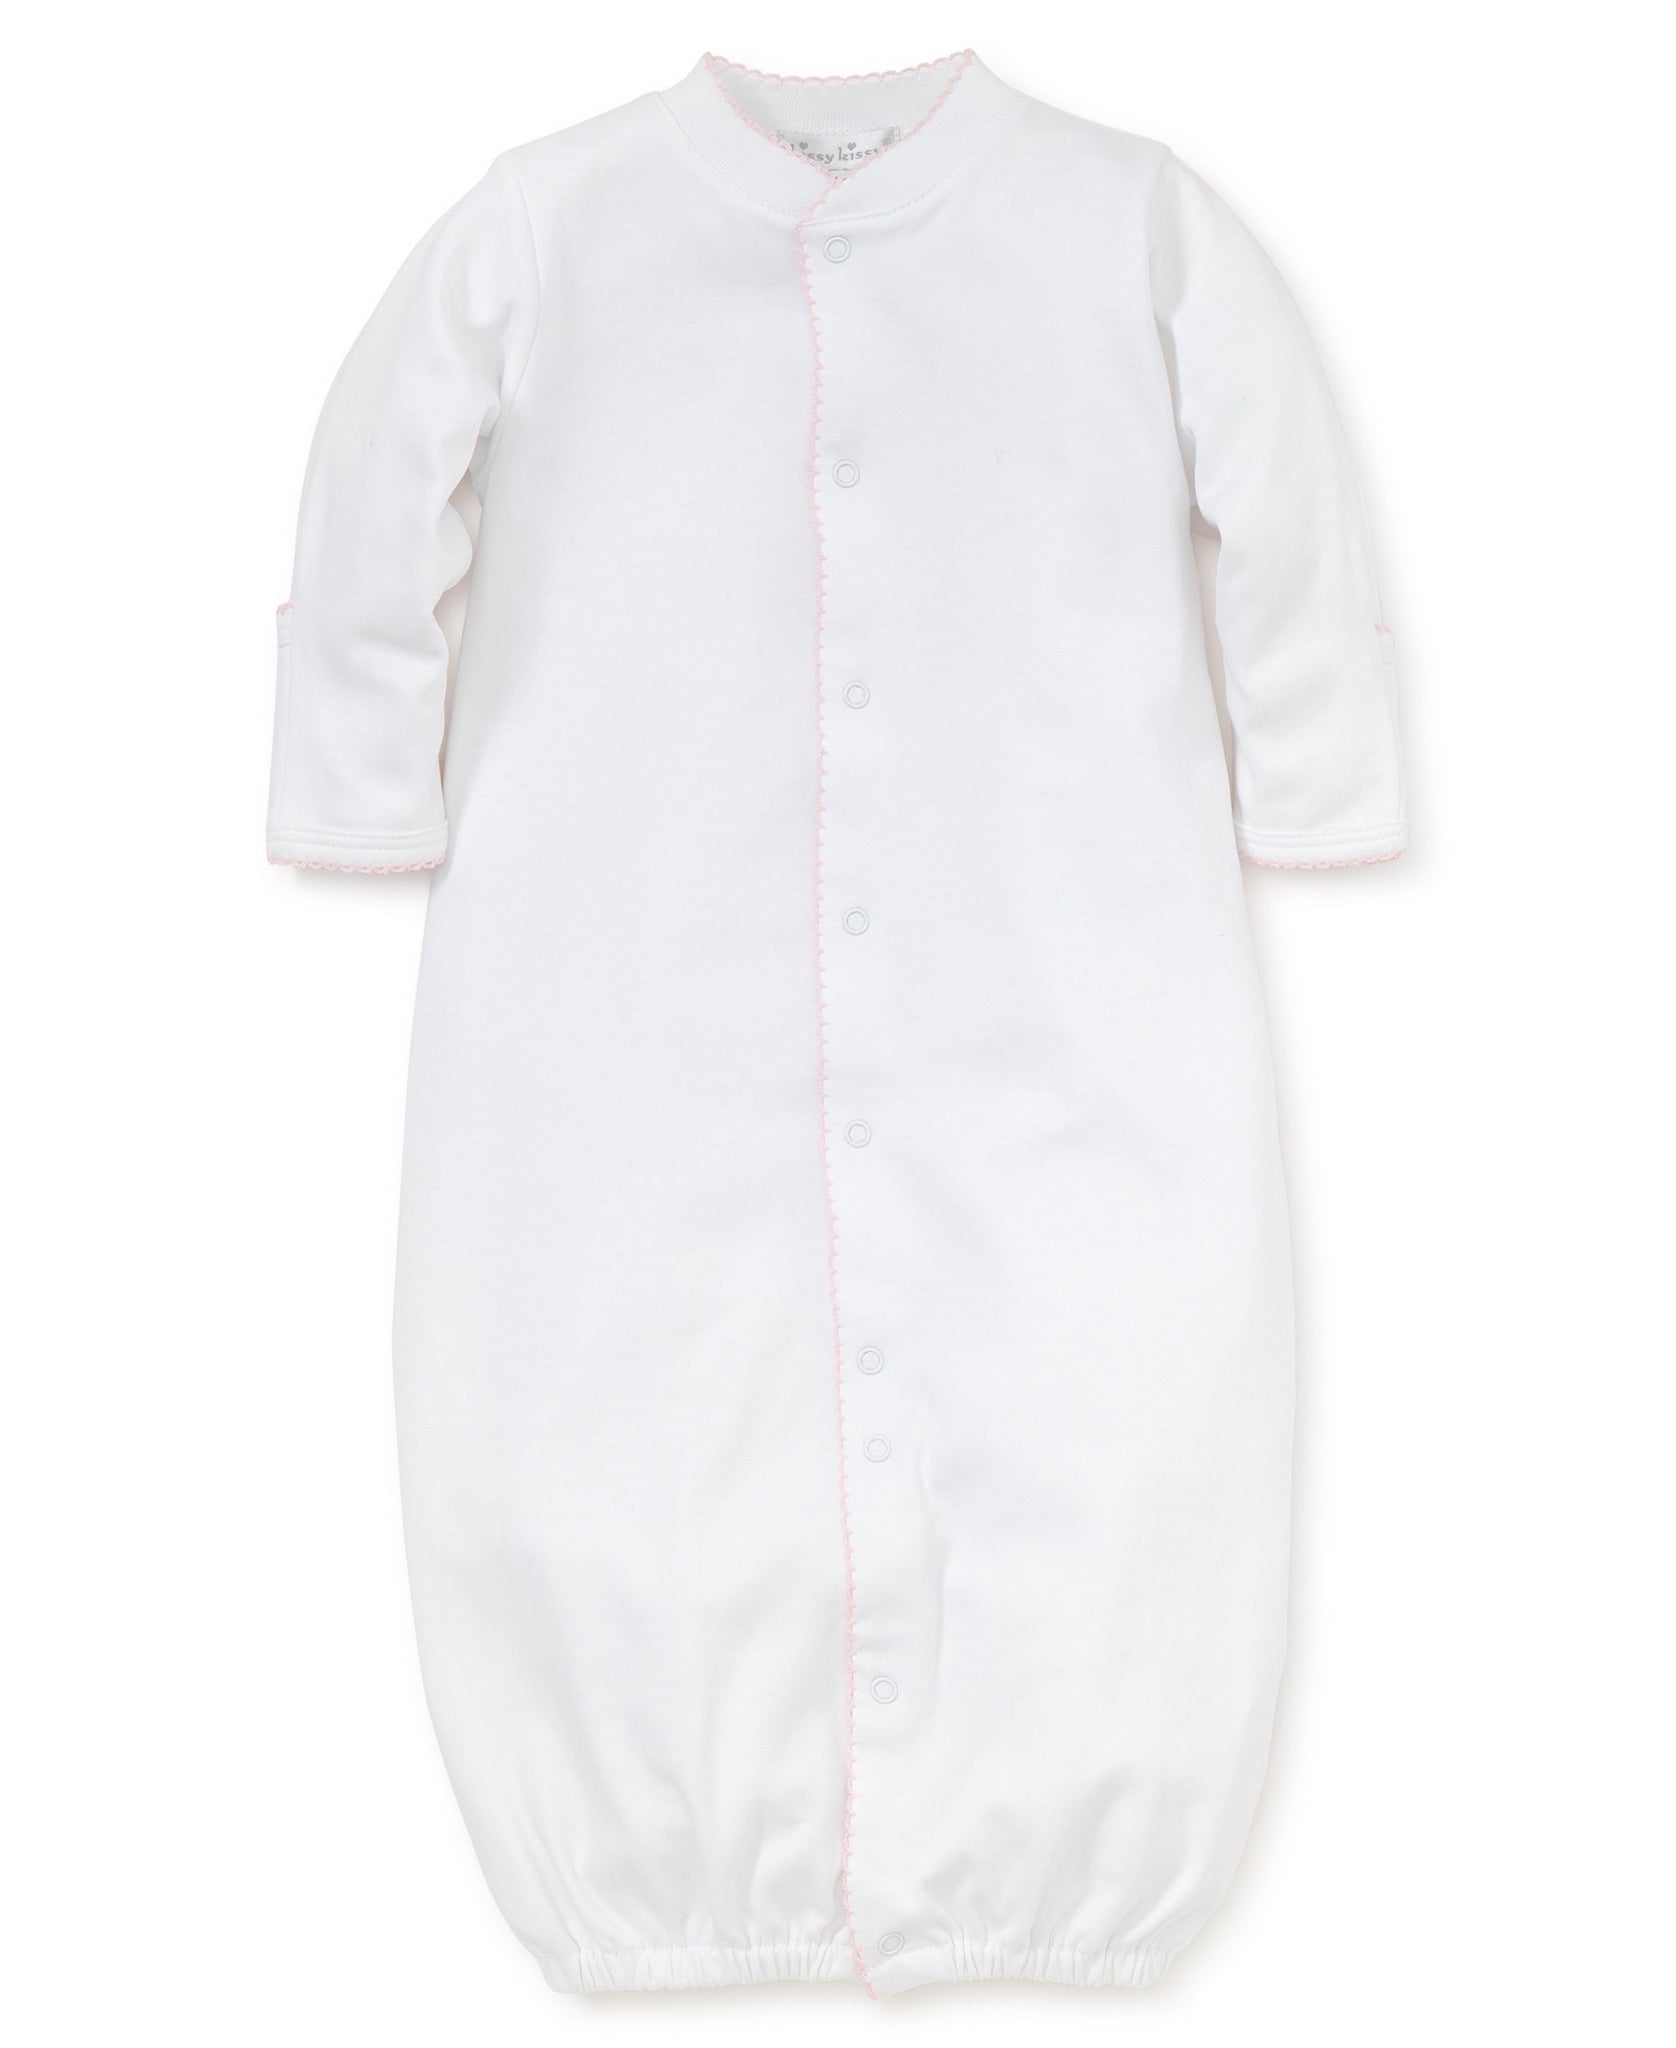 Basic Converter Gown White with Pink Trim